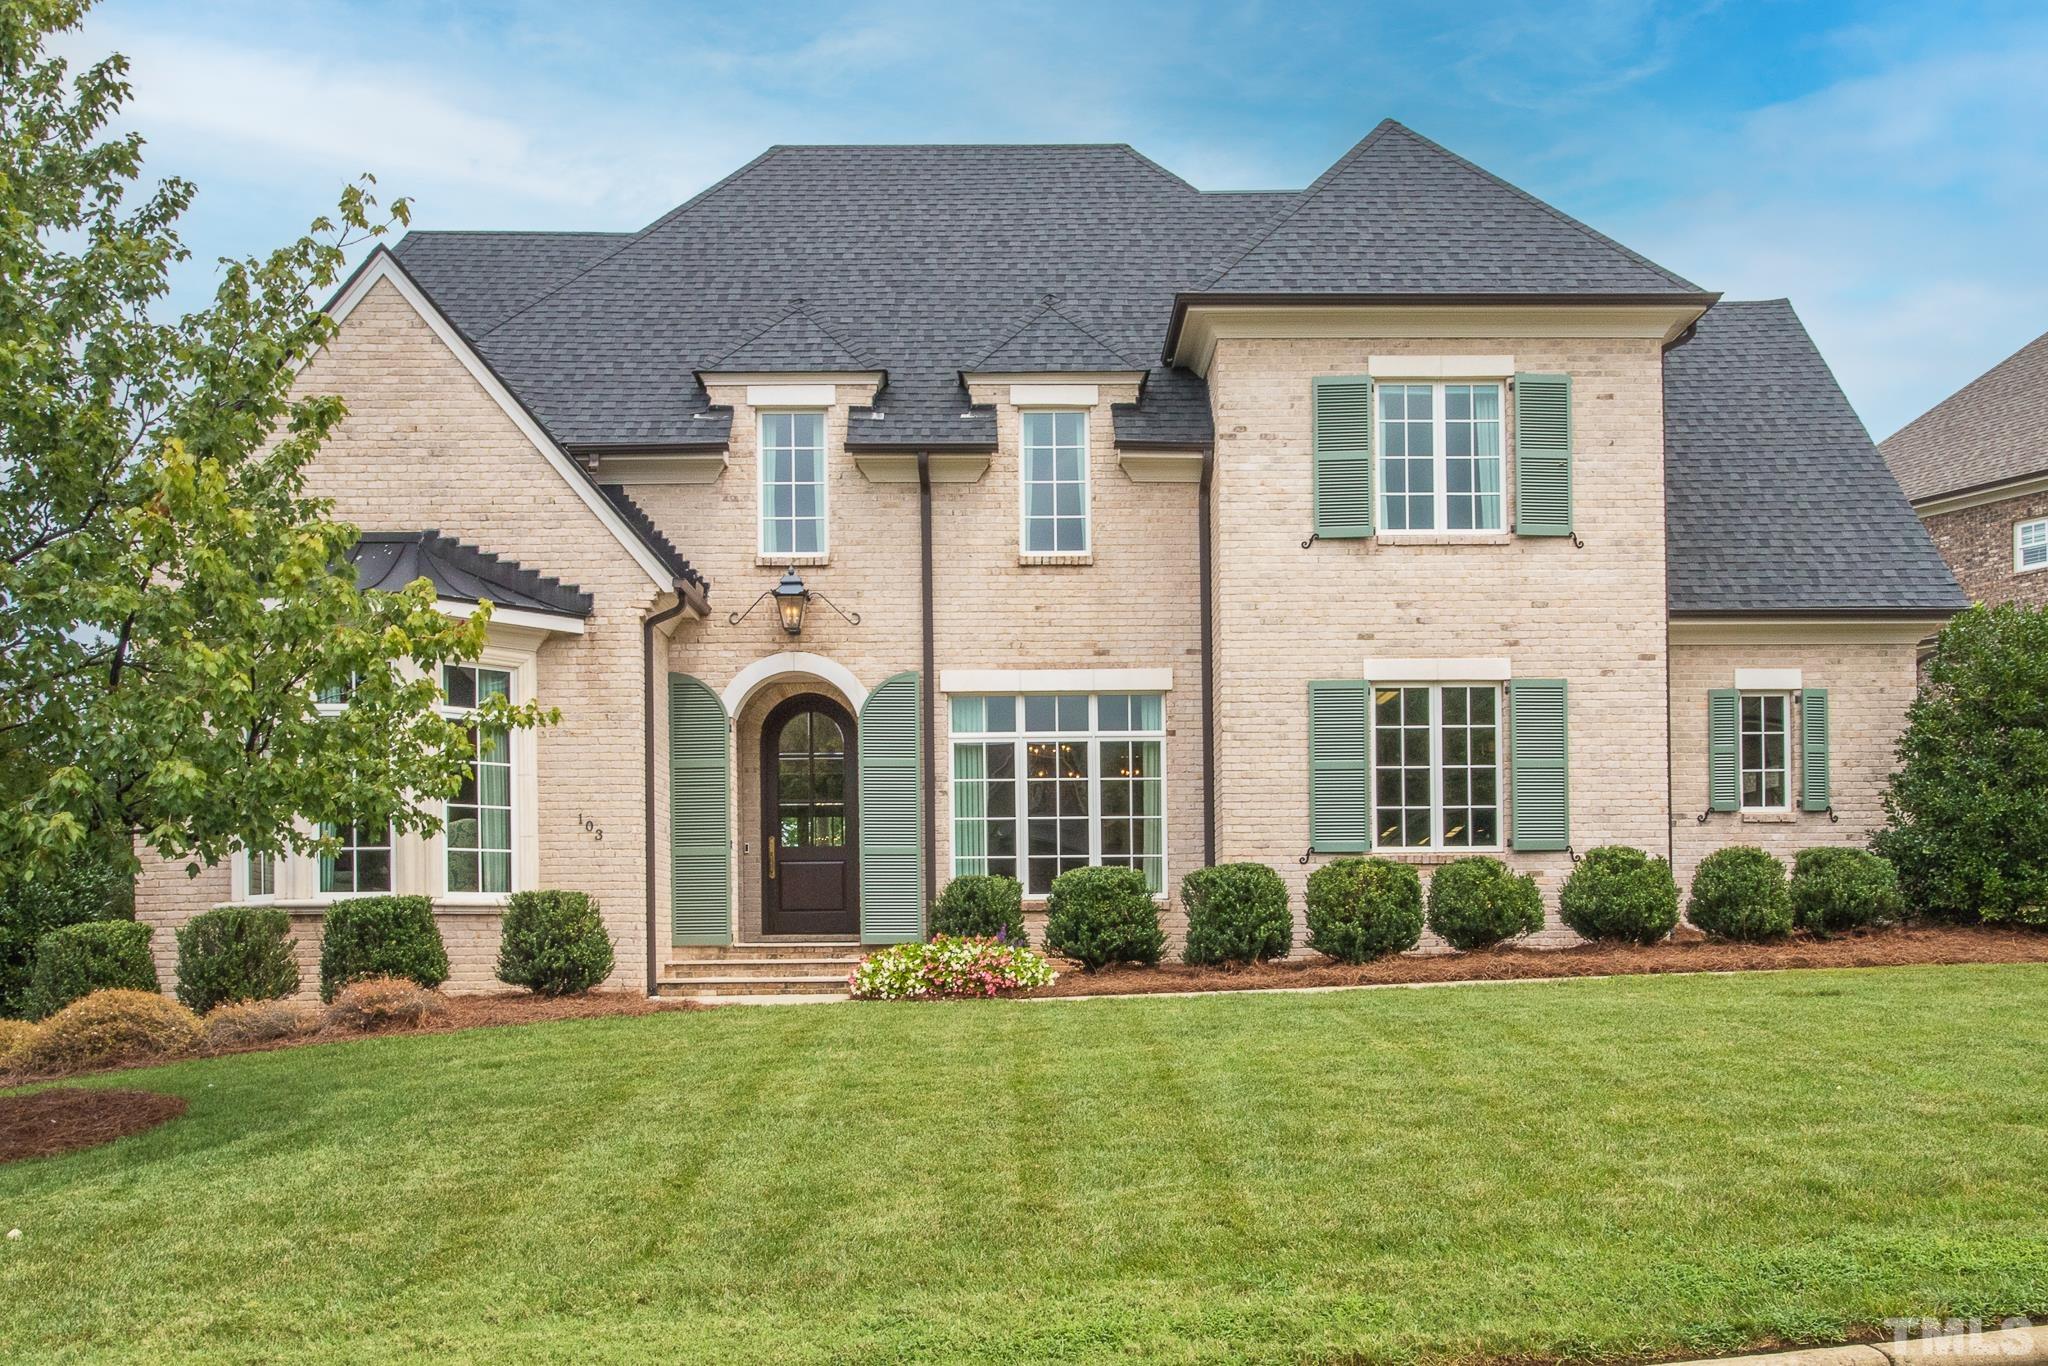 French-inspired charm in the heart of Cary